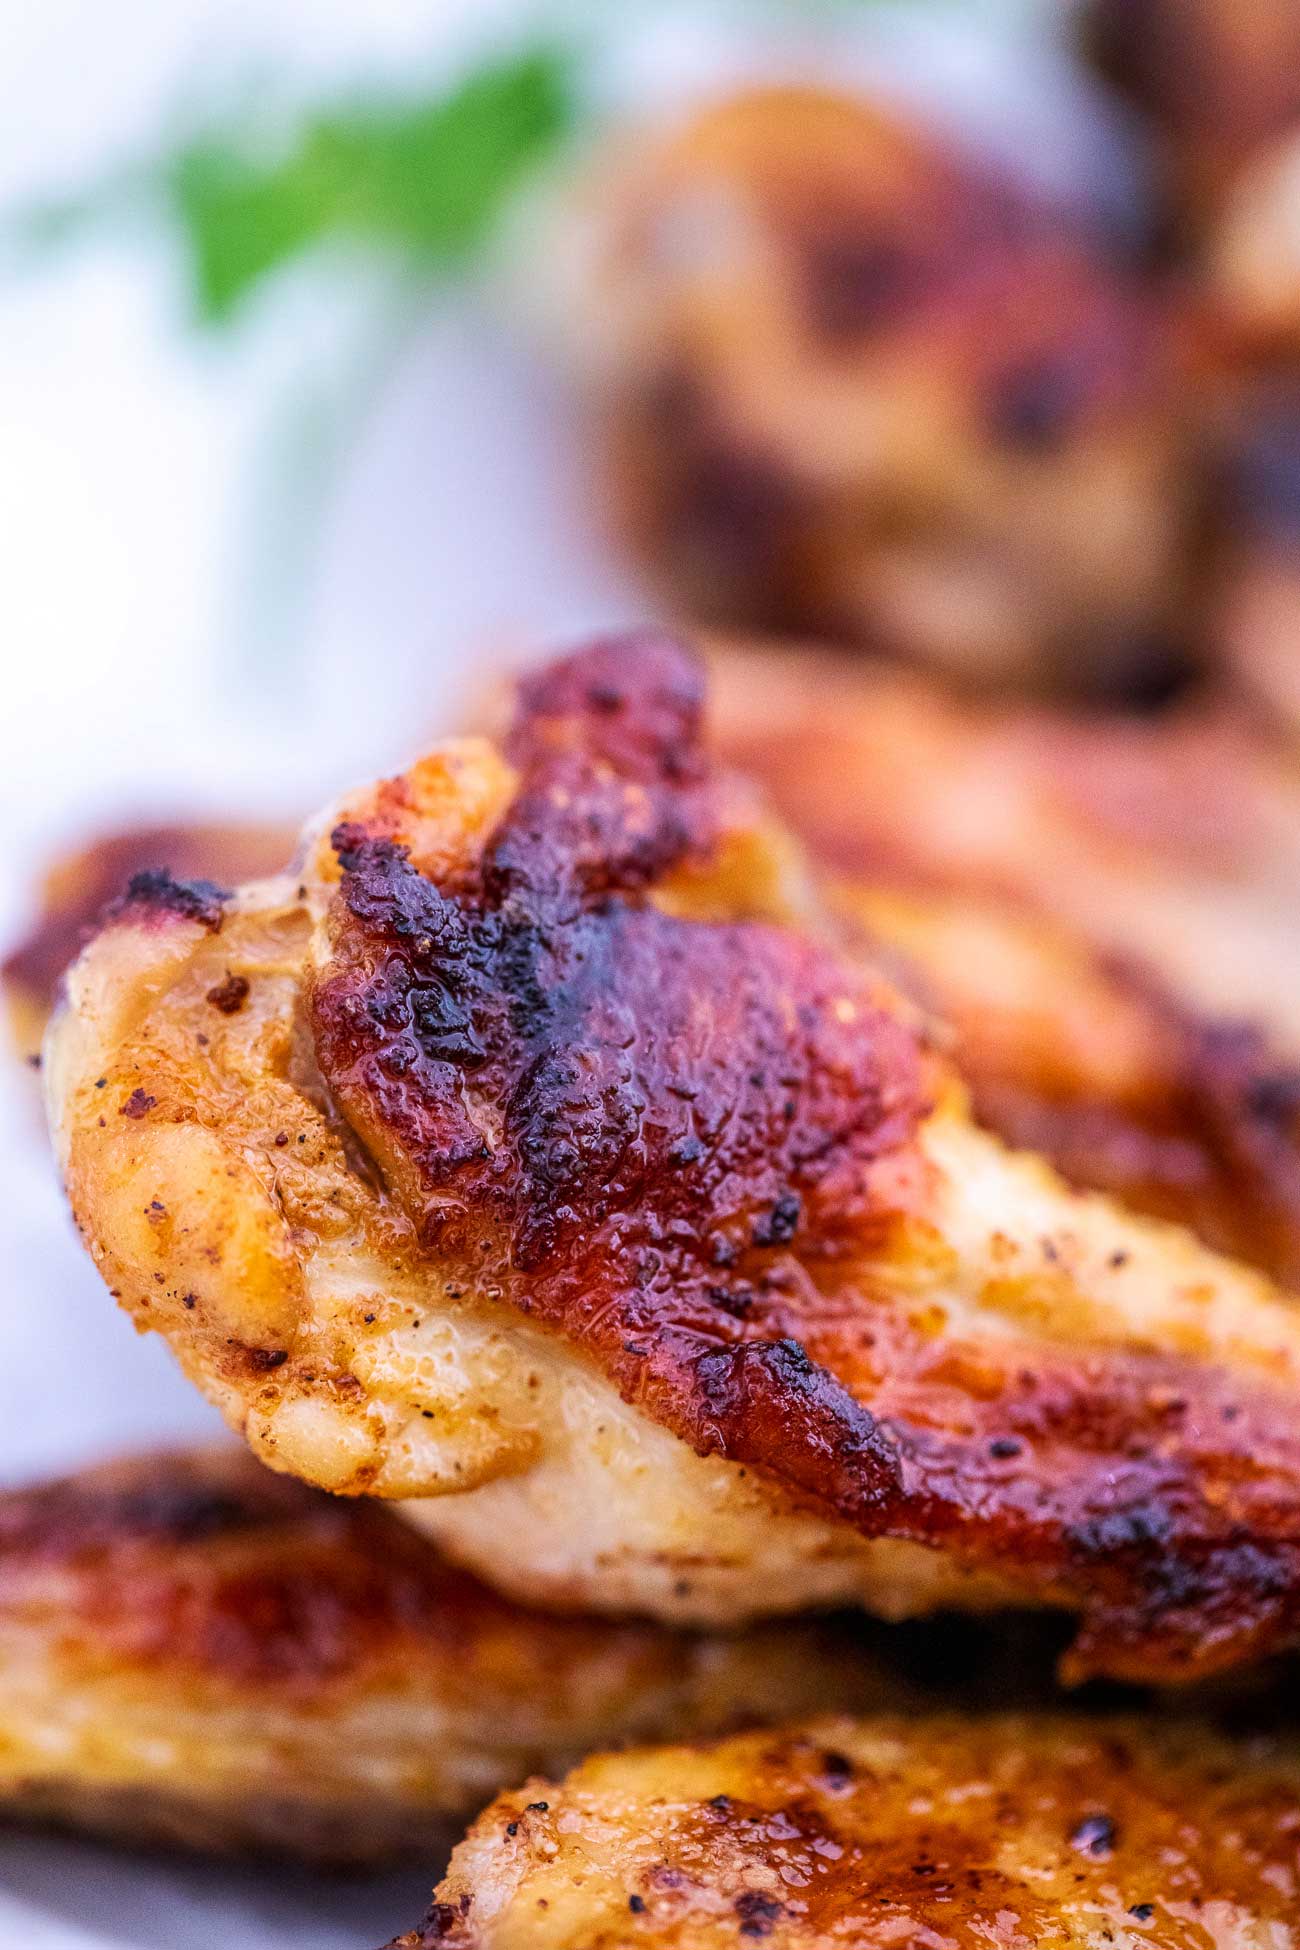 Grilled Chicken Wings Recipe Video Sweet And Savory Meals,Bake Bacon In Oven 425